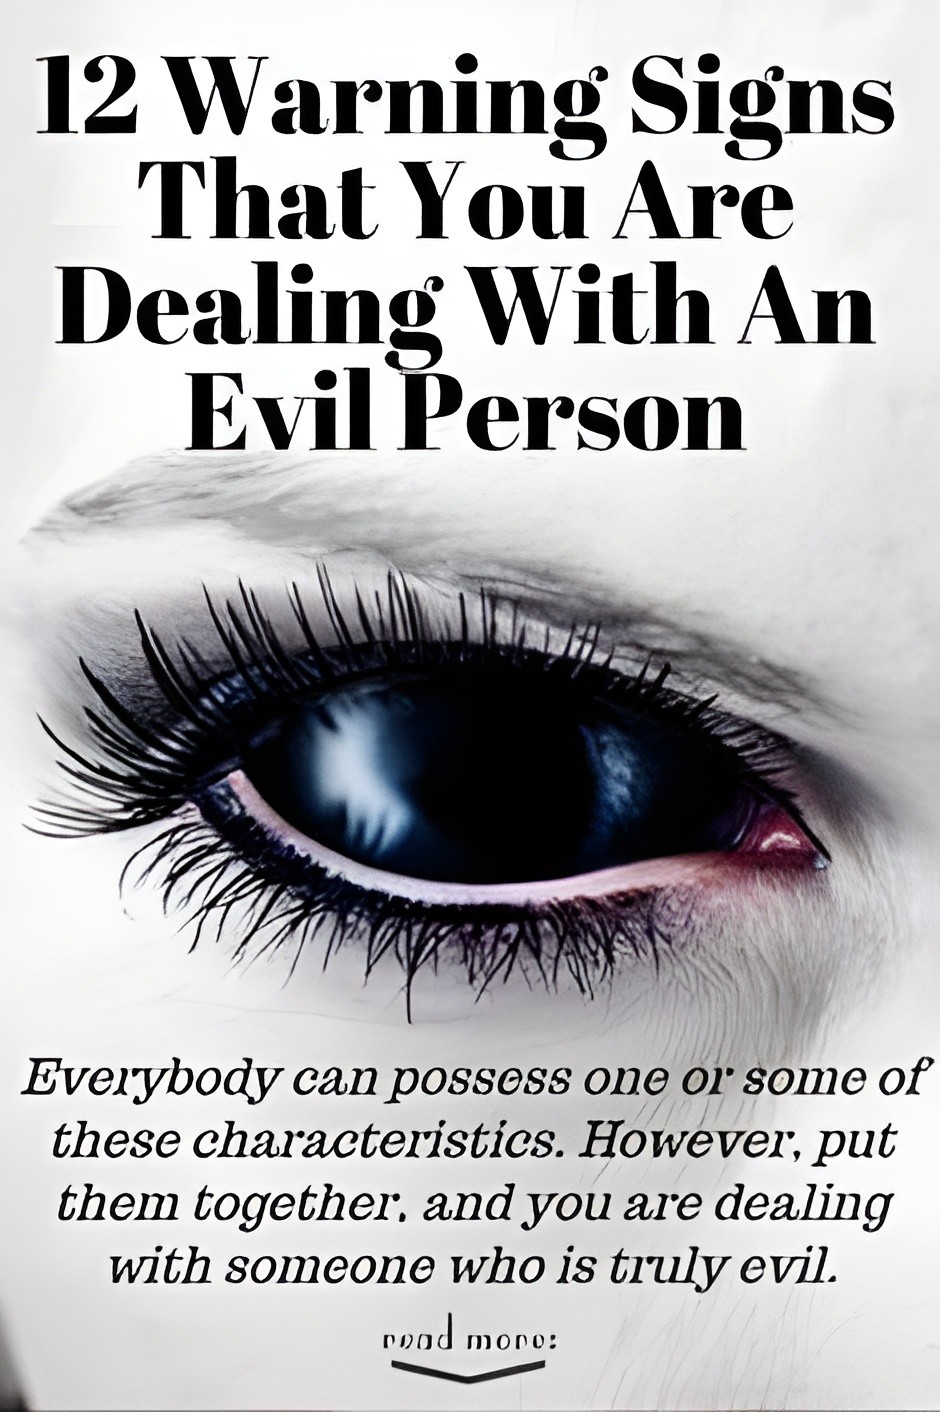 signs of an evil person